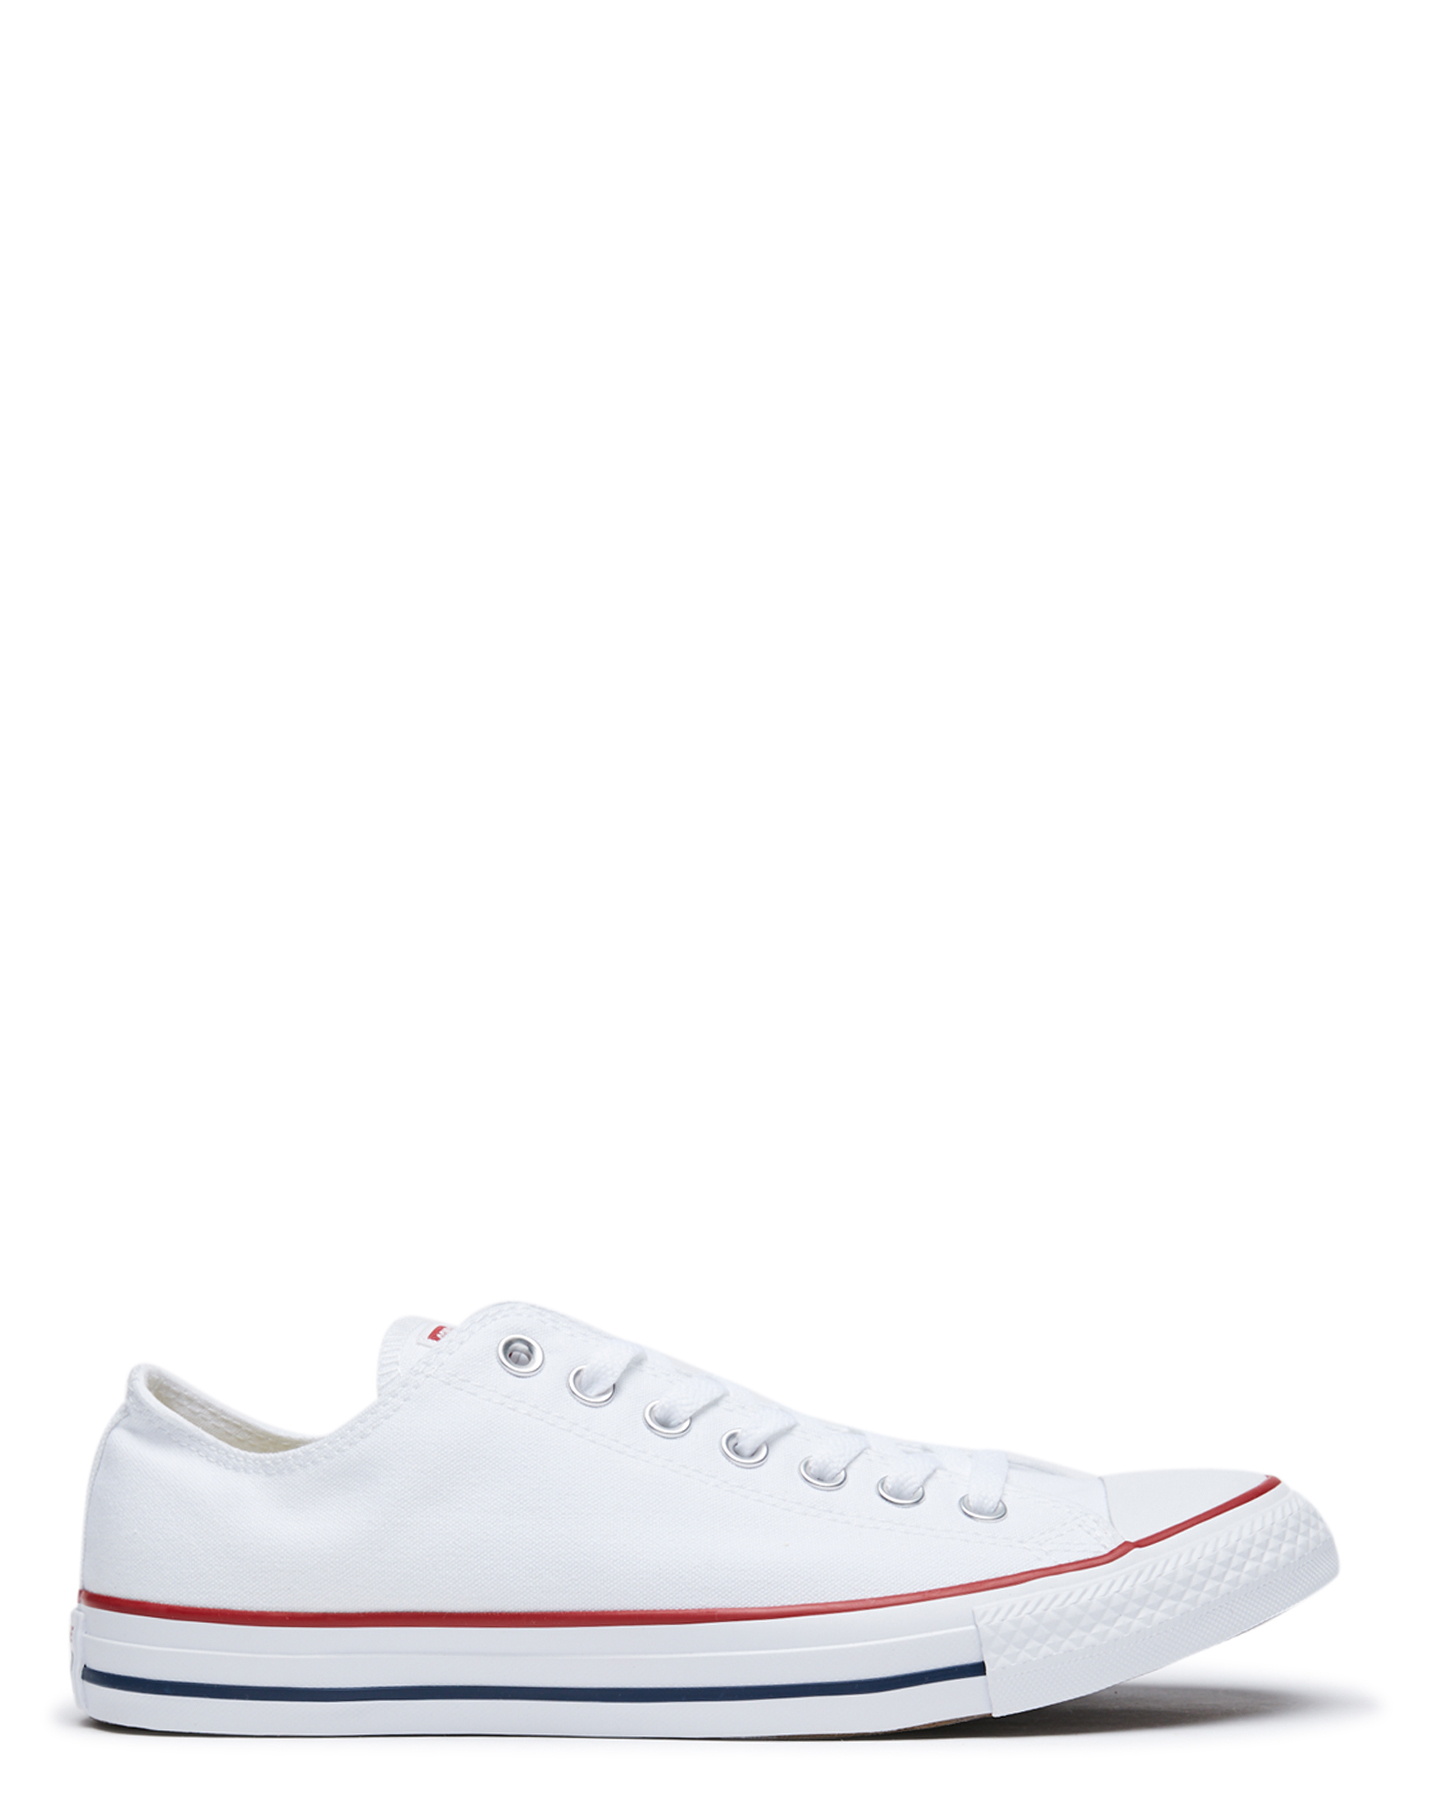 converse all star shoes womens